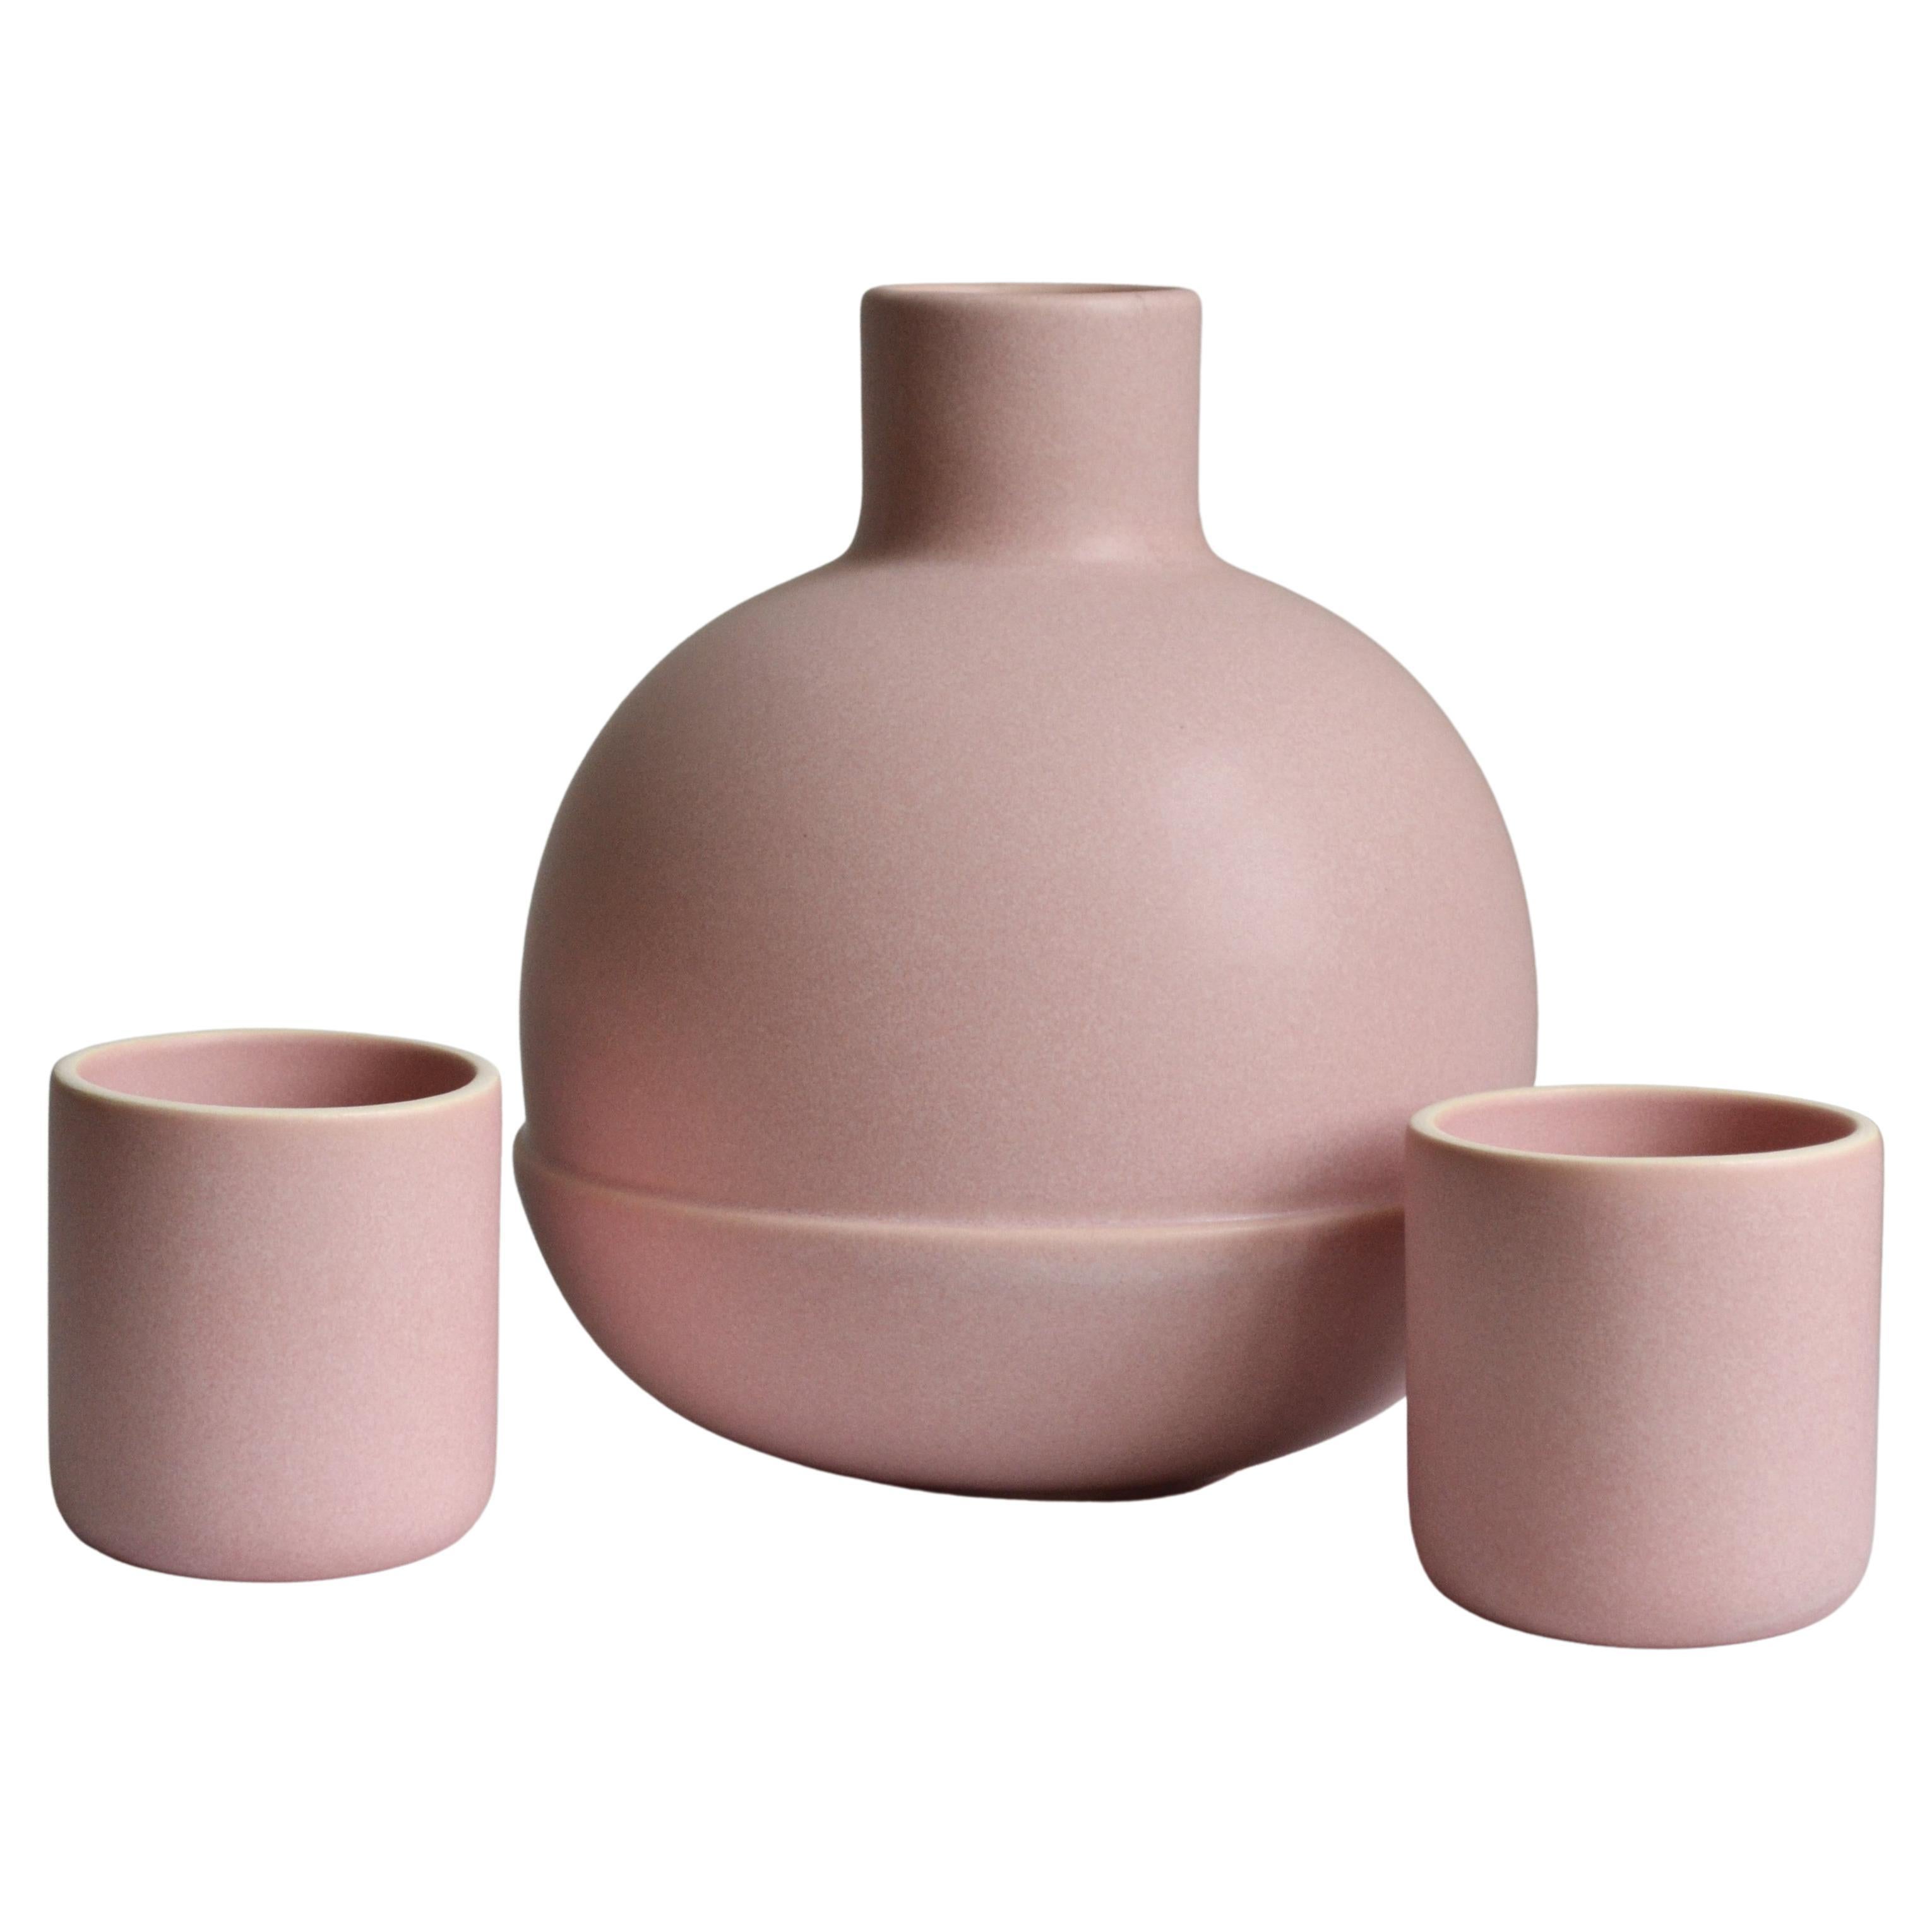 Pink Carafe and cups Inspired by Traditional Carafes Jug, Pitcher Decorative